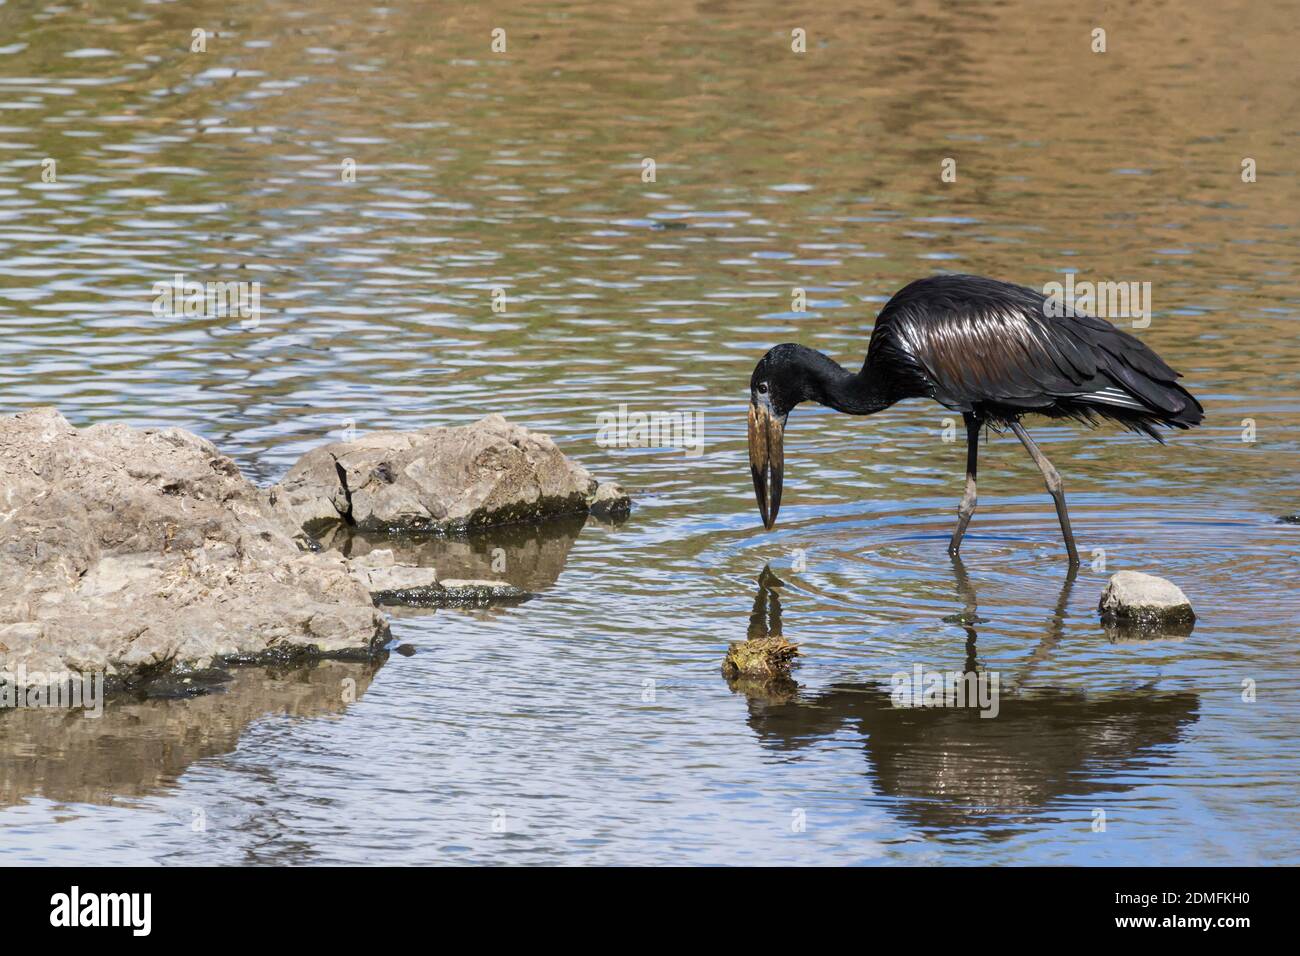 African openbill stork (Anastomus lamelligerus) wading in a river and fishing with his reflection in the water in Kruger National Park, South Africa Stock Photo